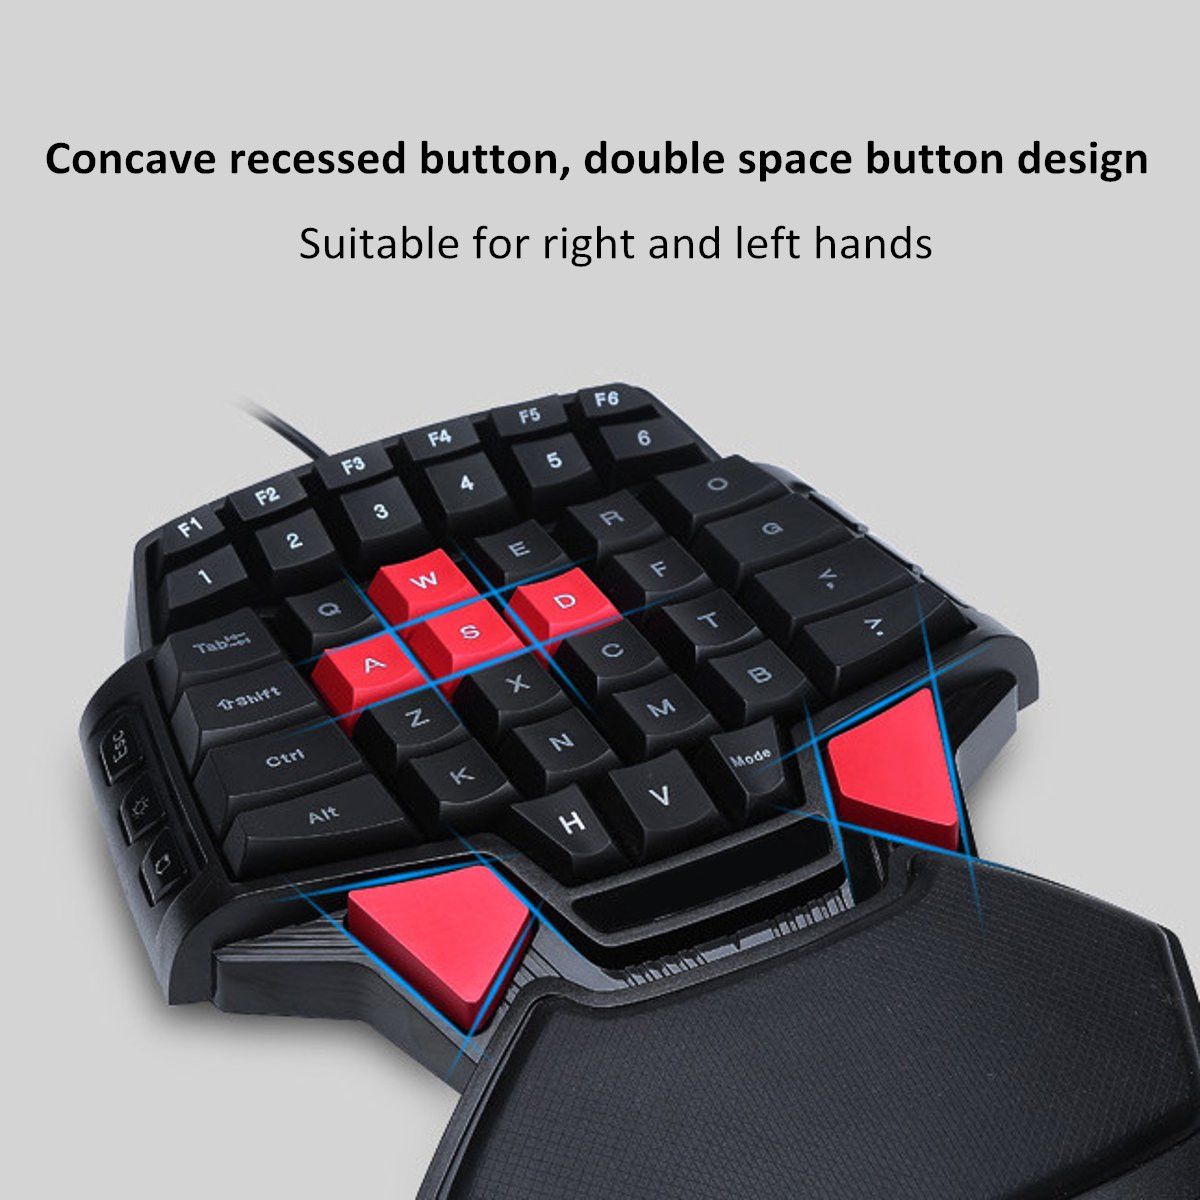 DeLUX-T9-47-Key-USB-Wired-Mini-Single-Hand-Gaming-Keyboard-for-PC-Laptop-1353522